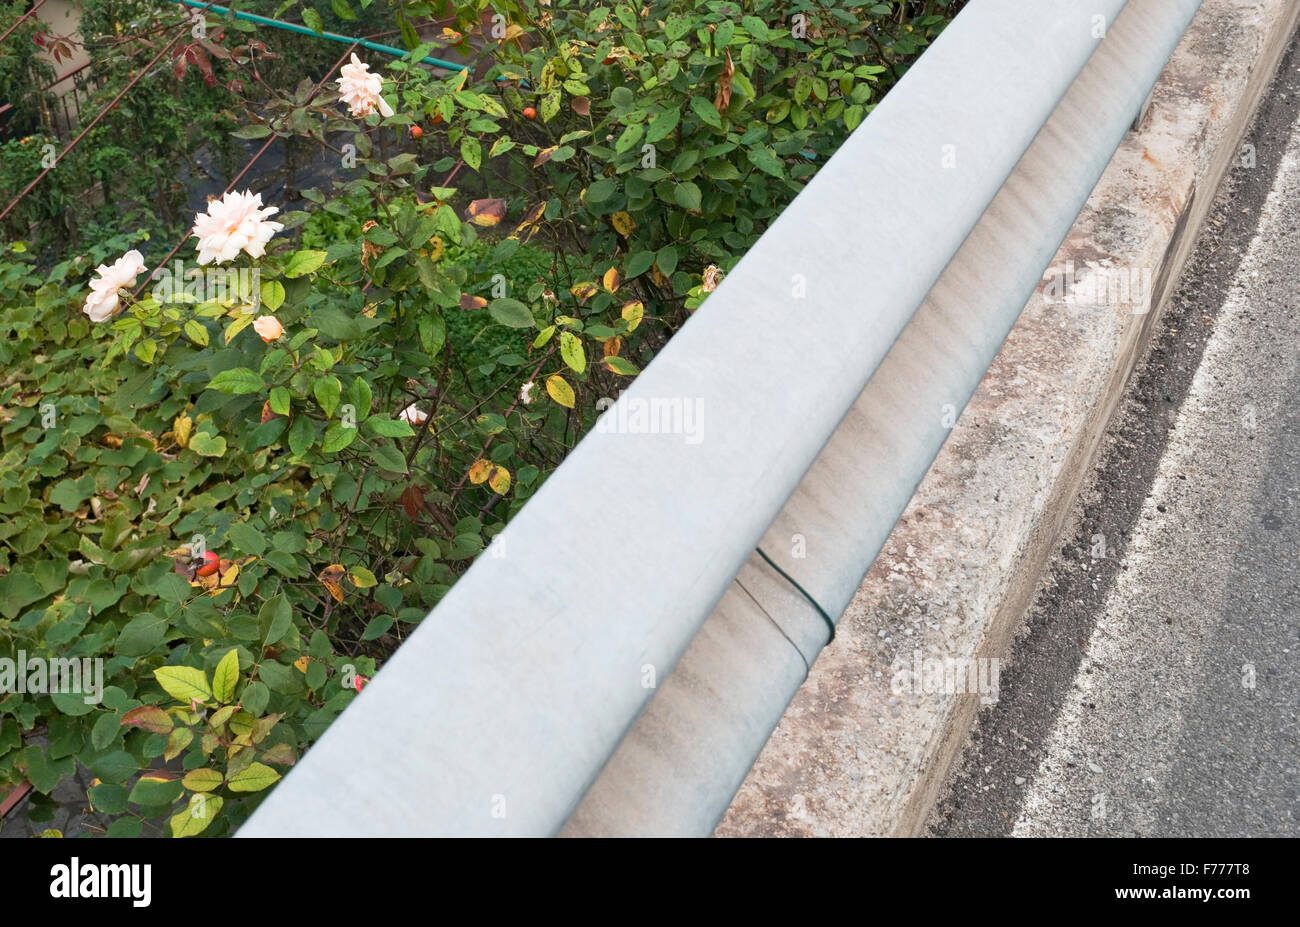 Guard rail and roses Stock Photo